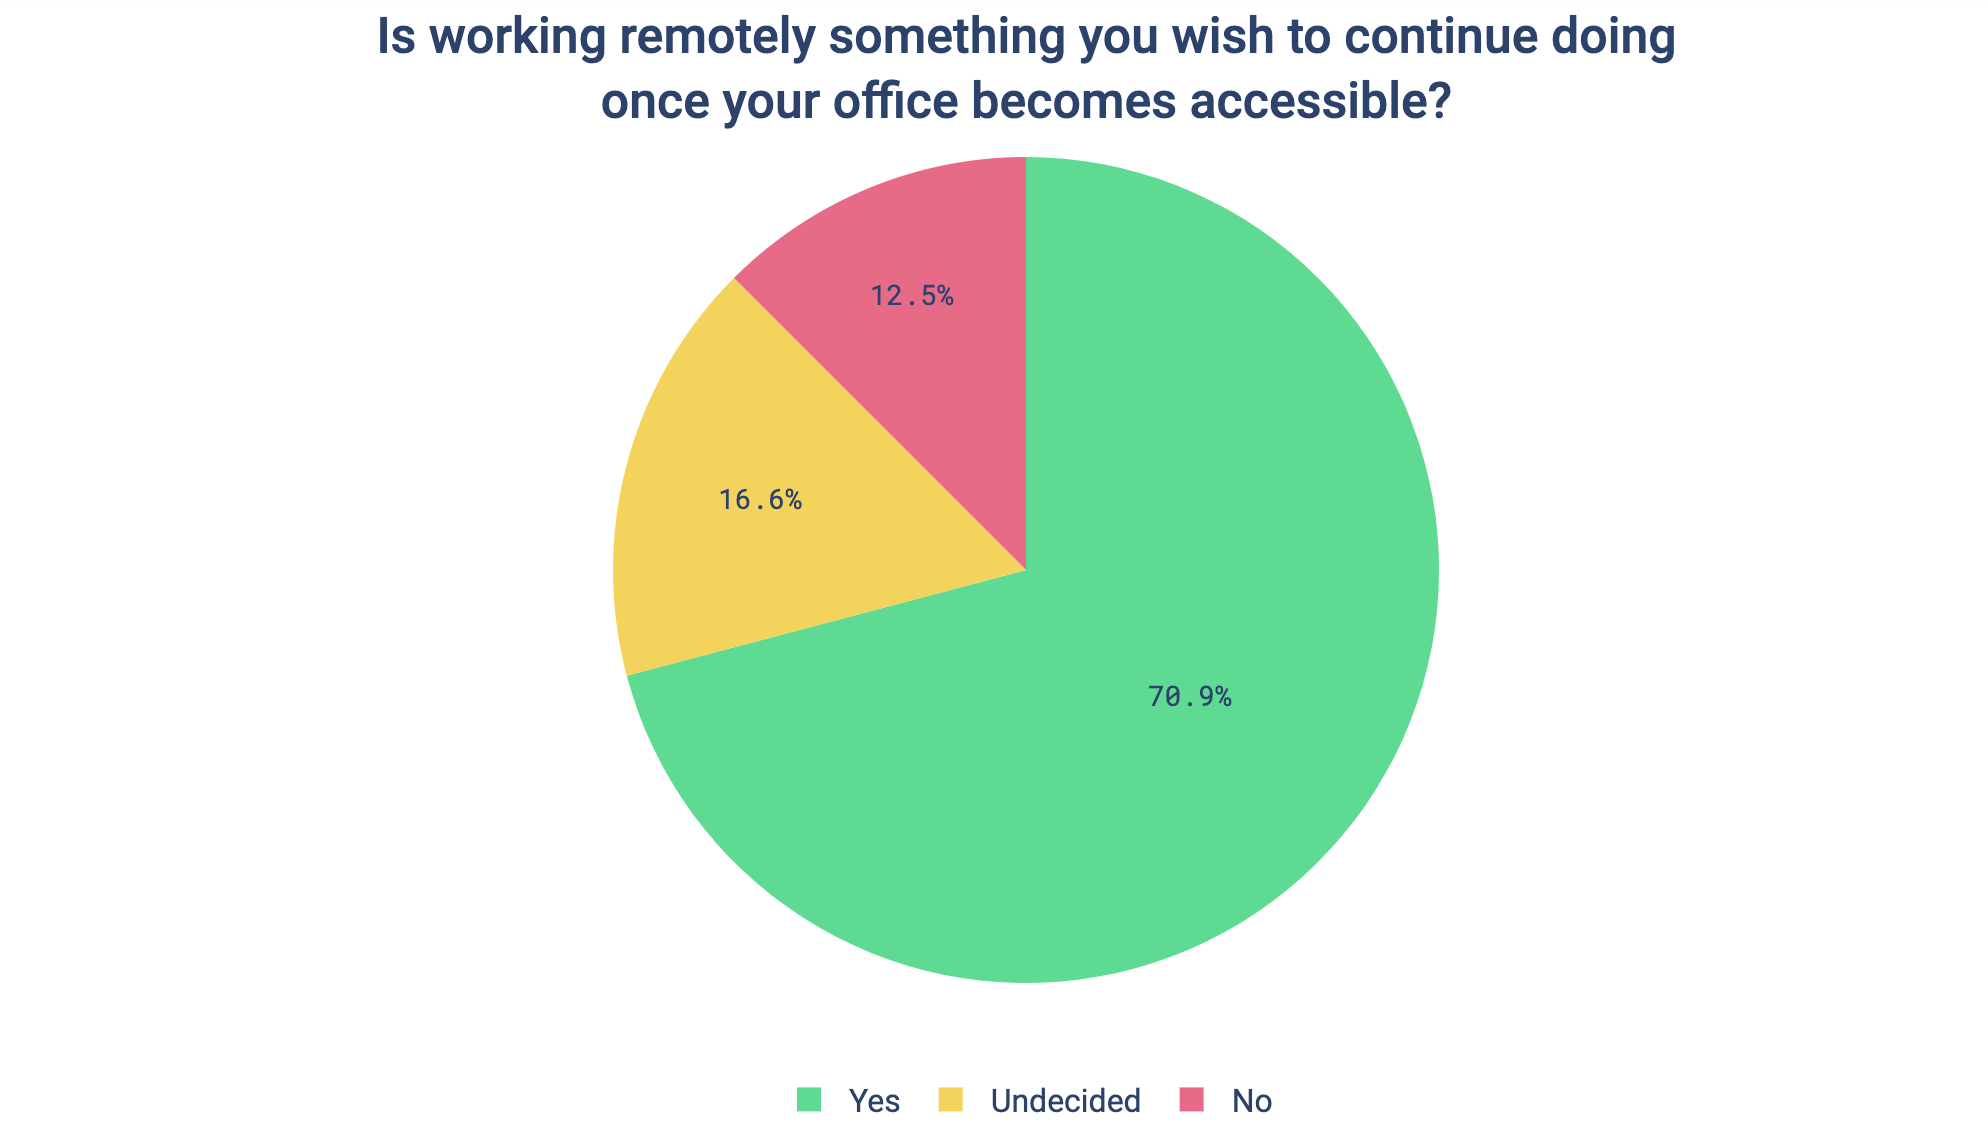 is-working-remotely-something-you-wish-to-continue-doing-once-your-office-becomes-accessible